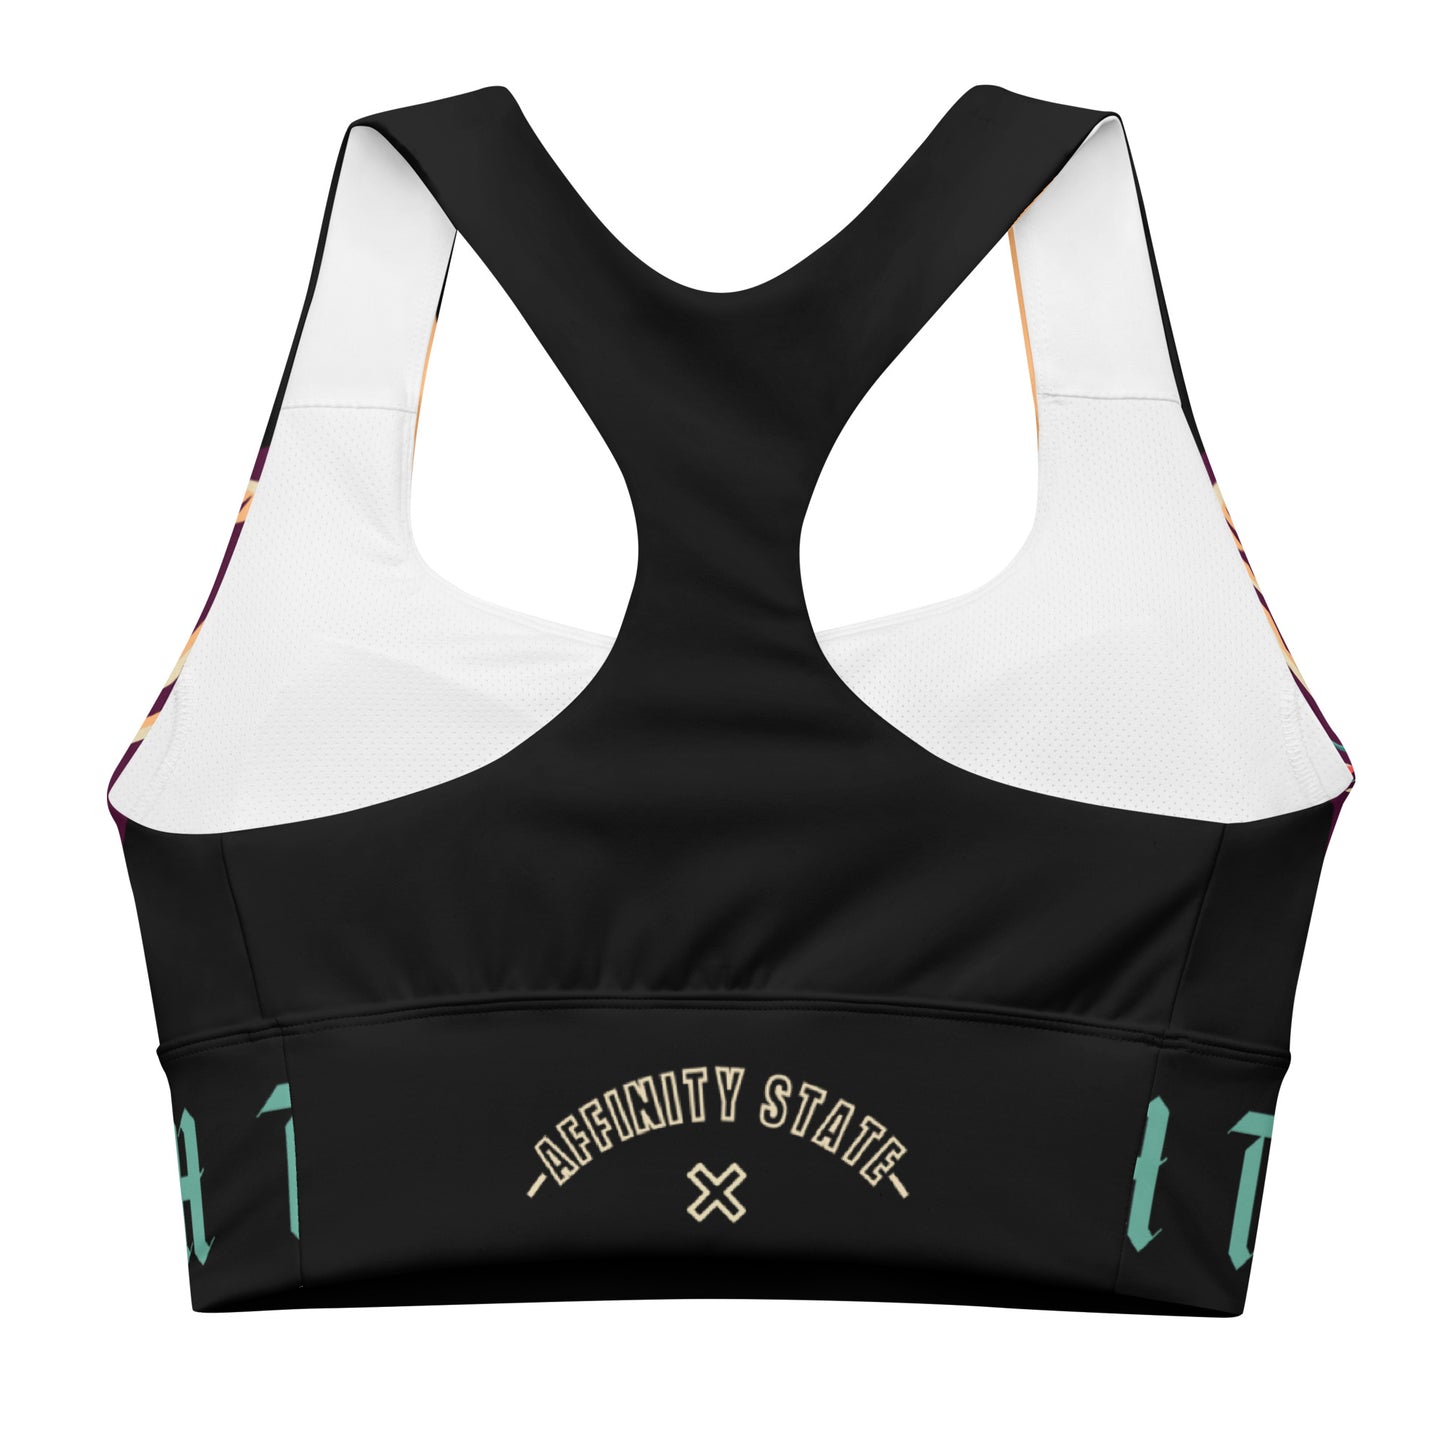 To The Death - Affinity Sports Bra